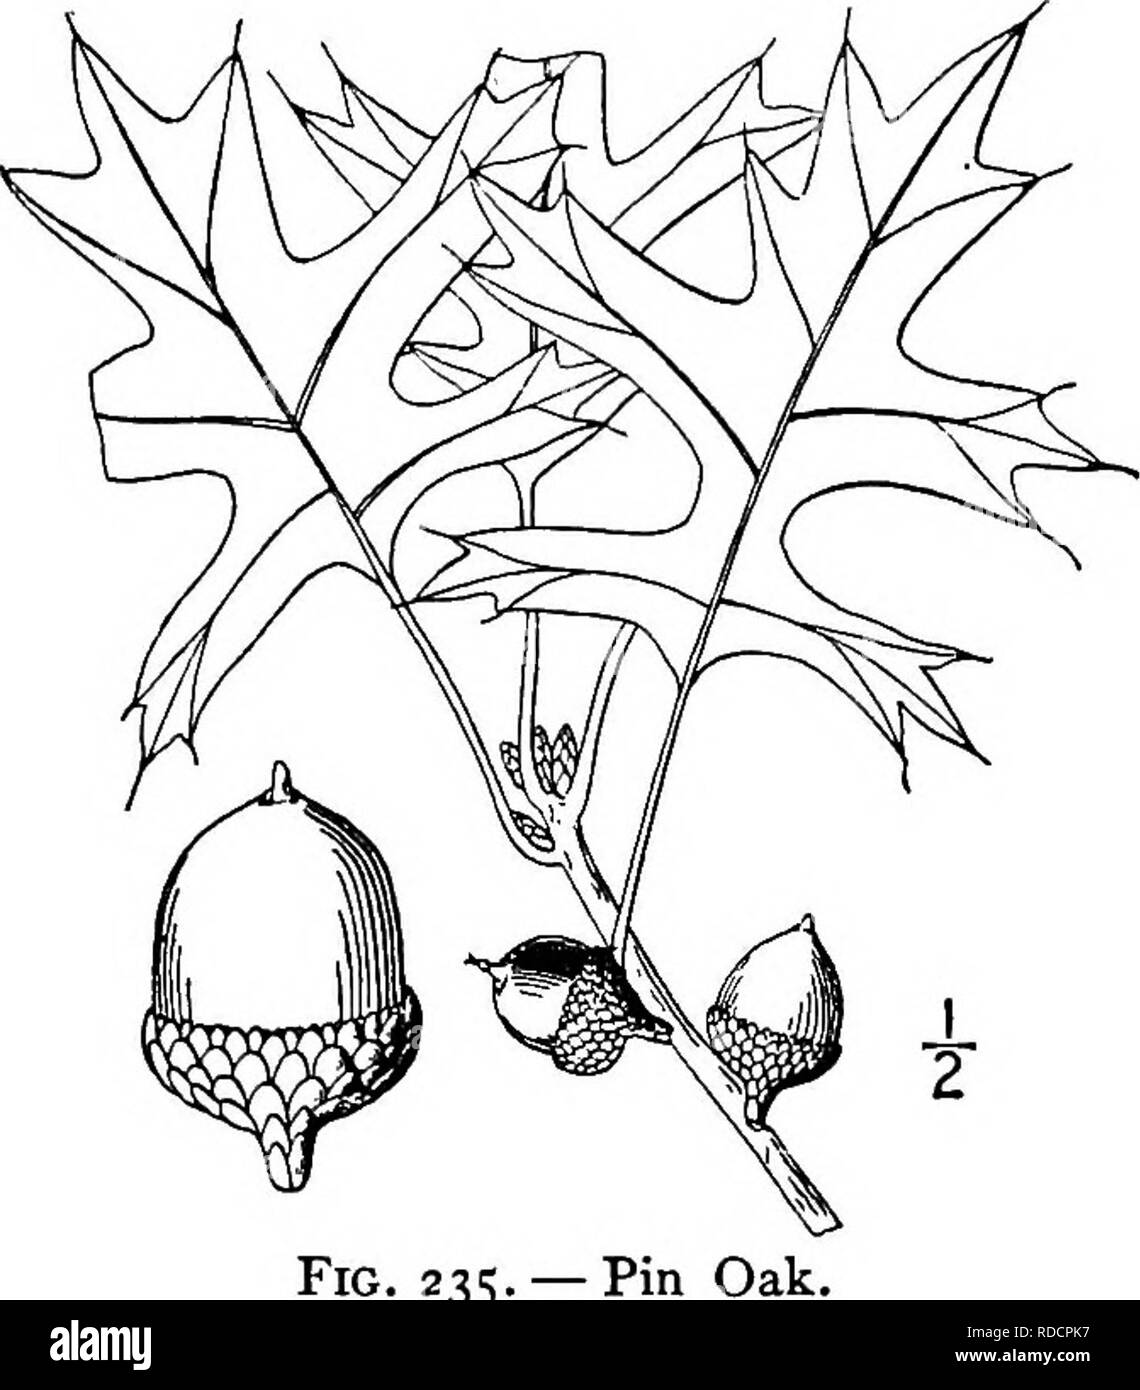 . North American trees : being descriptions and illustrations of the trees growing independently of cultivation in North America, north of Mexico and the West Indies . Trees. Pin Oak 283. Fig. 235 2. PIN OAK — Quercus palustris Du Roi This handsome tree occurs in wet river-bottom lands or on the borders of swamps in rich soil from Massachusetts to Michigan and Missouri, southward to Virginia, Tennessee, and Indian Territory. Its maximum height is about 40 meters, with a trunk diameter of 1.5 m. It is also called Swamp Spanish oak. Water oak, and Water Spanish oak. The trunk is tall and straigh Stock Photo